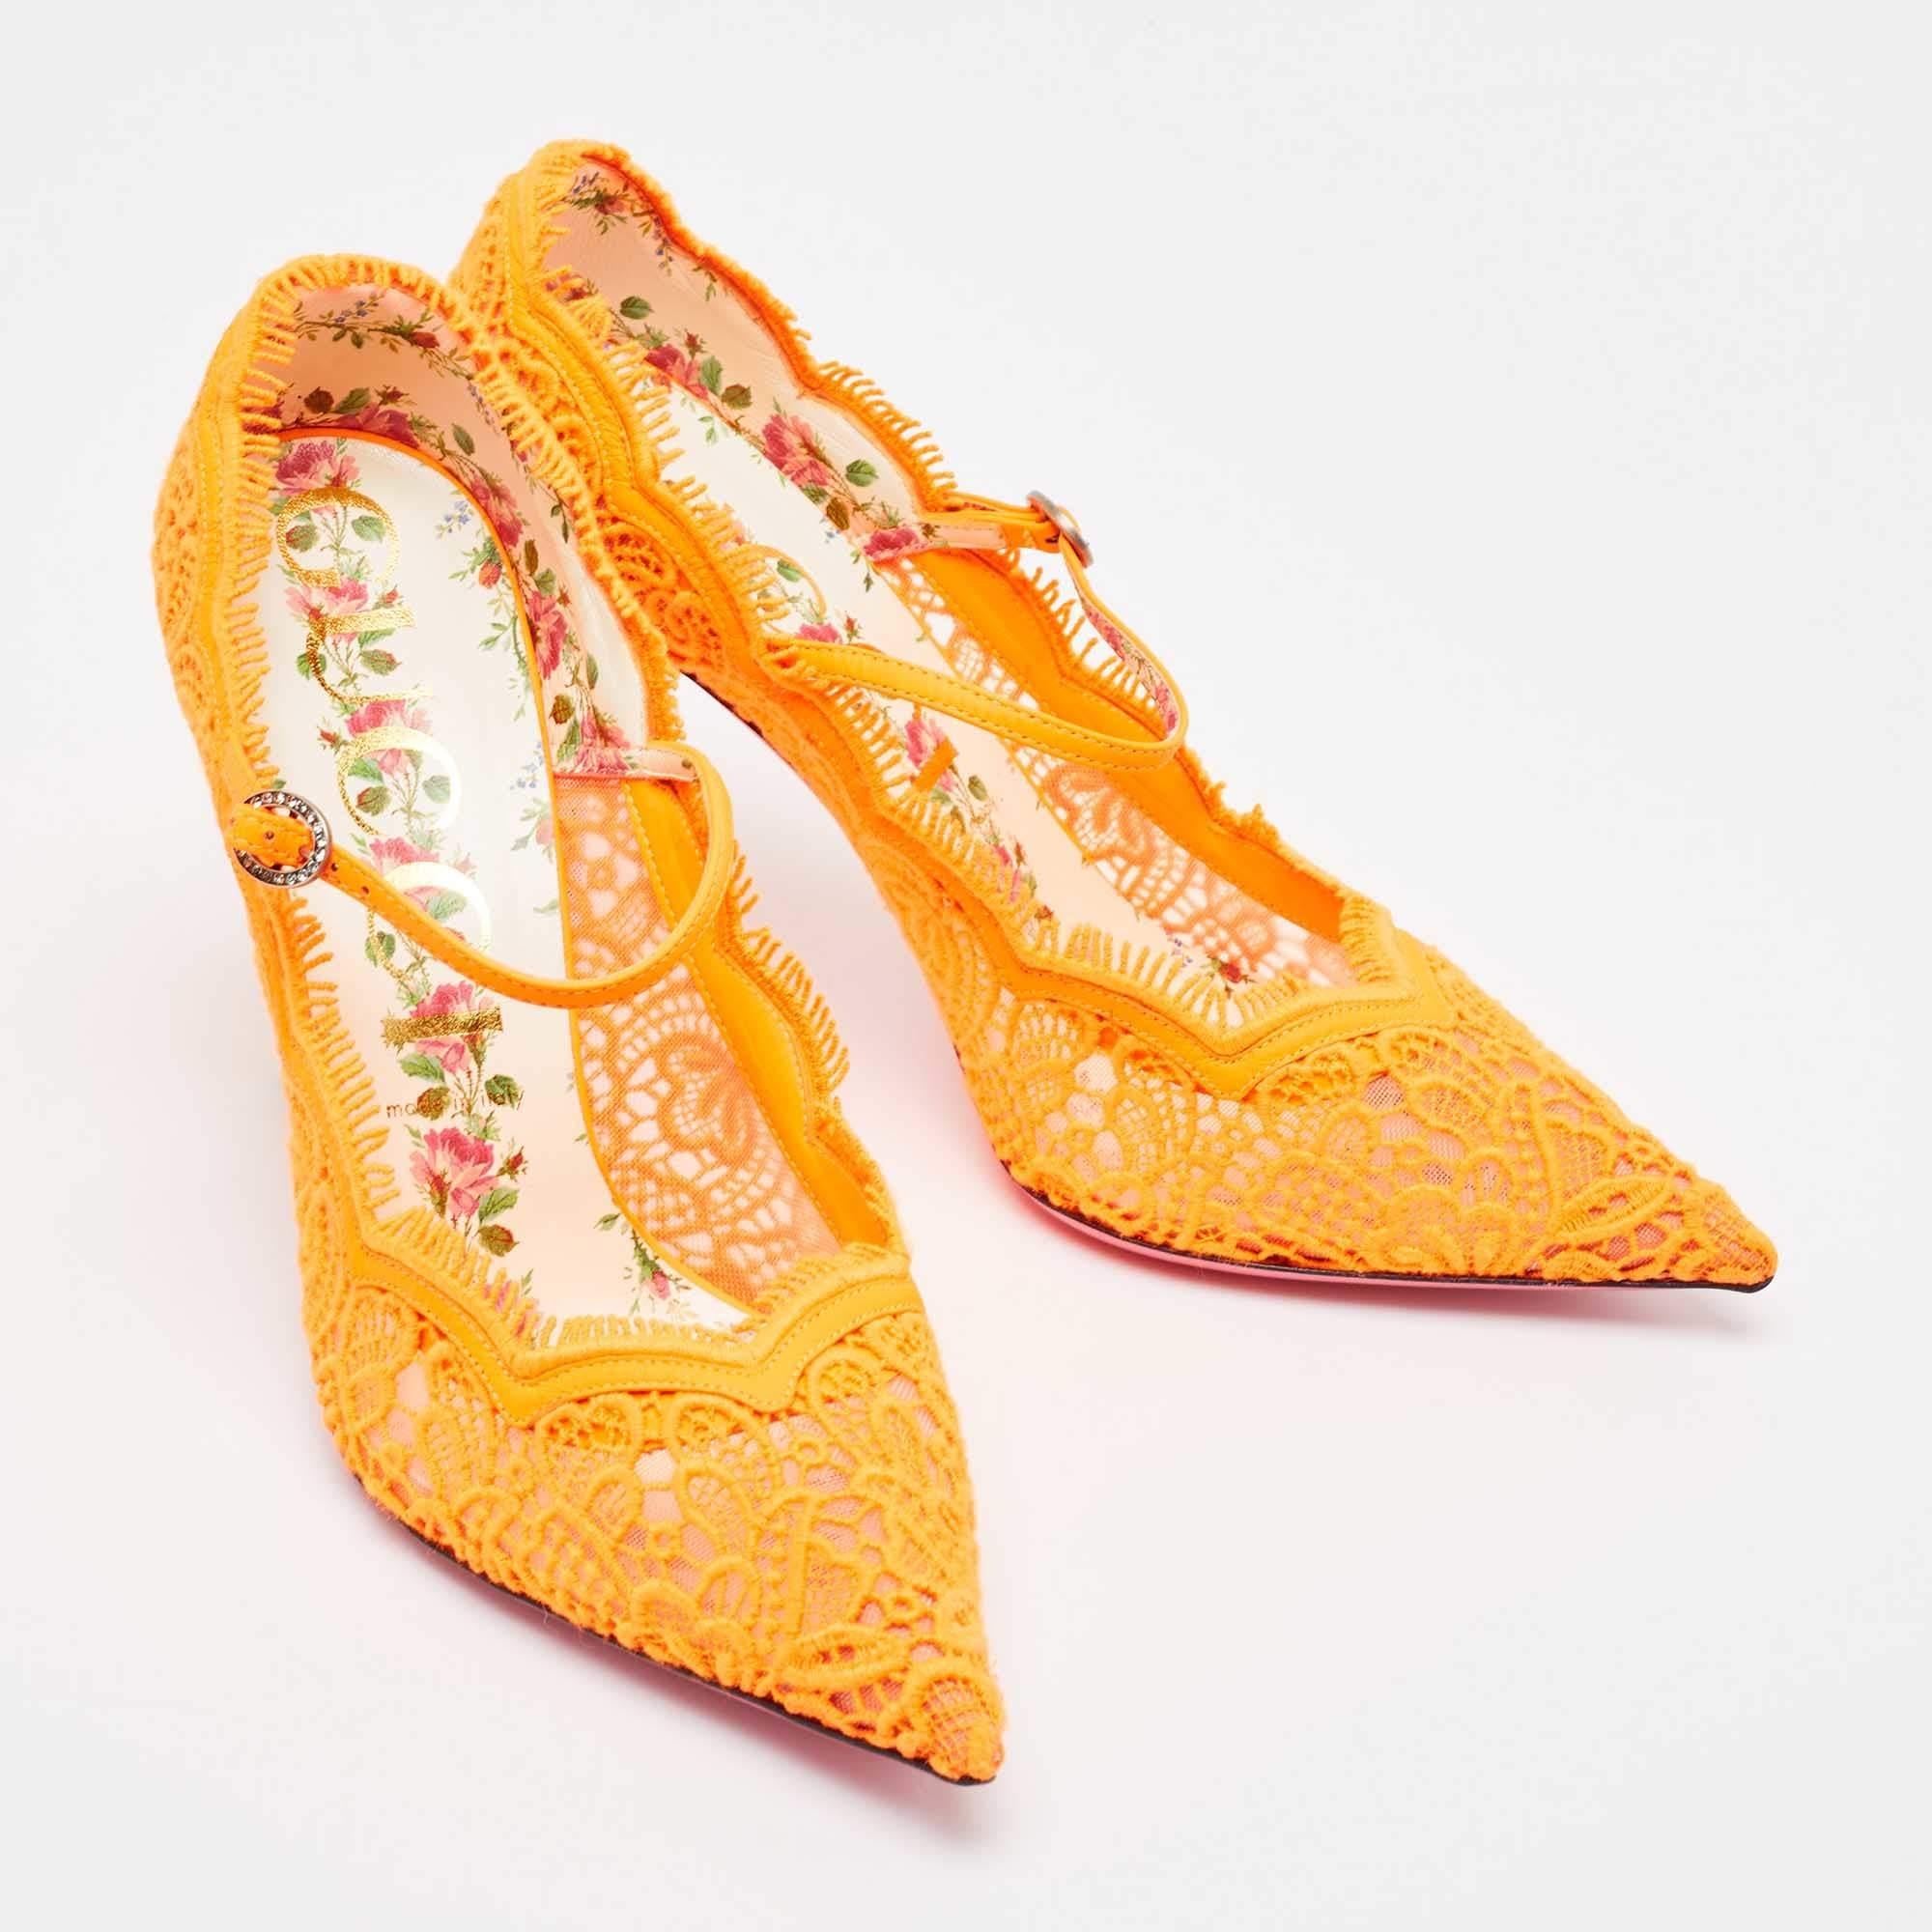 Gucci Neon Orange Mesh and Lace Virginia Mary Jane Pumps Size 41 1